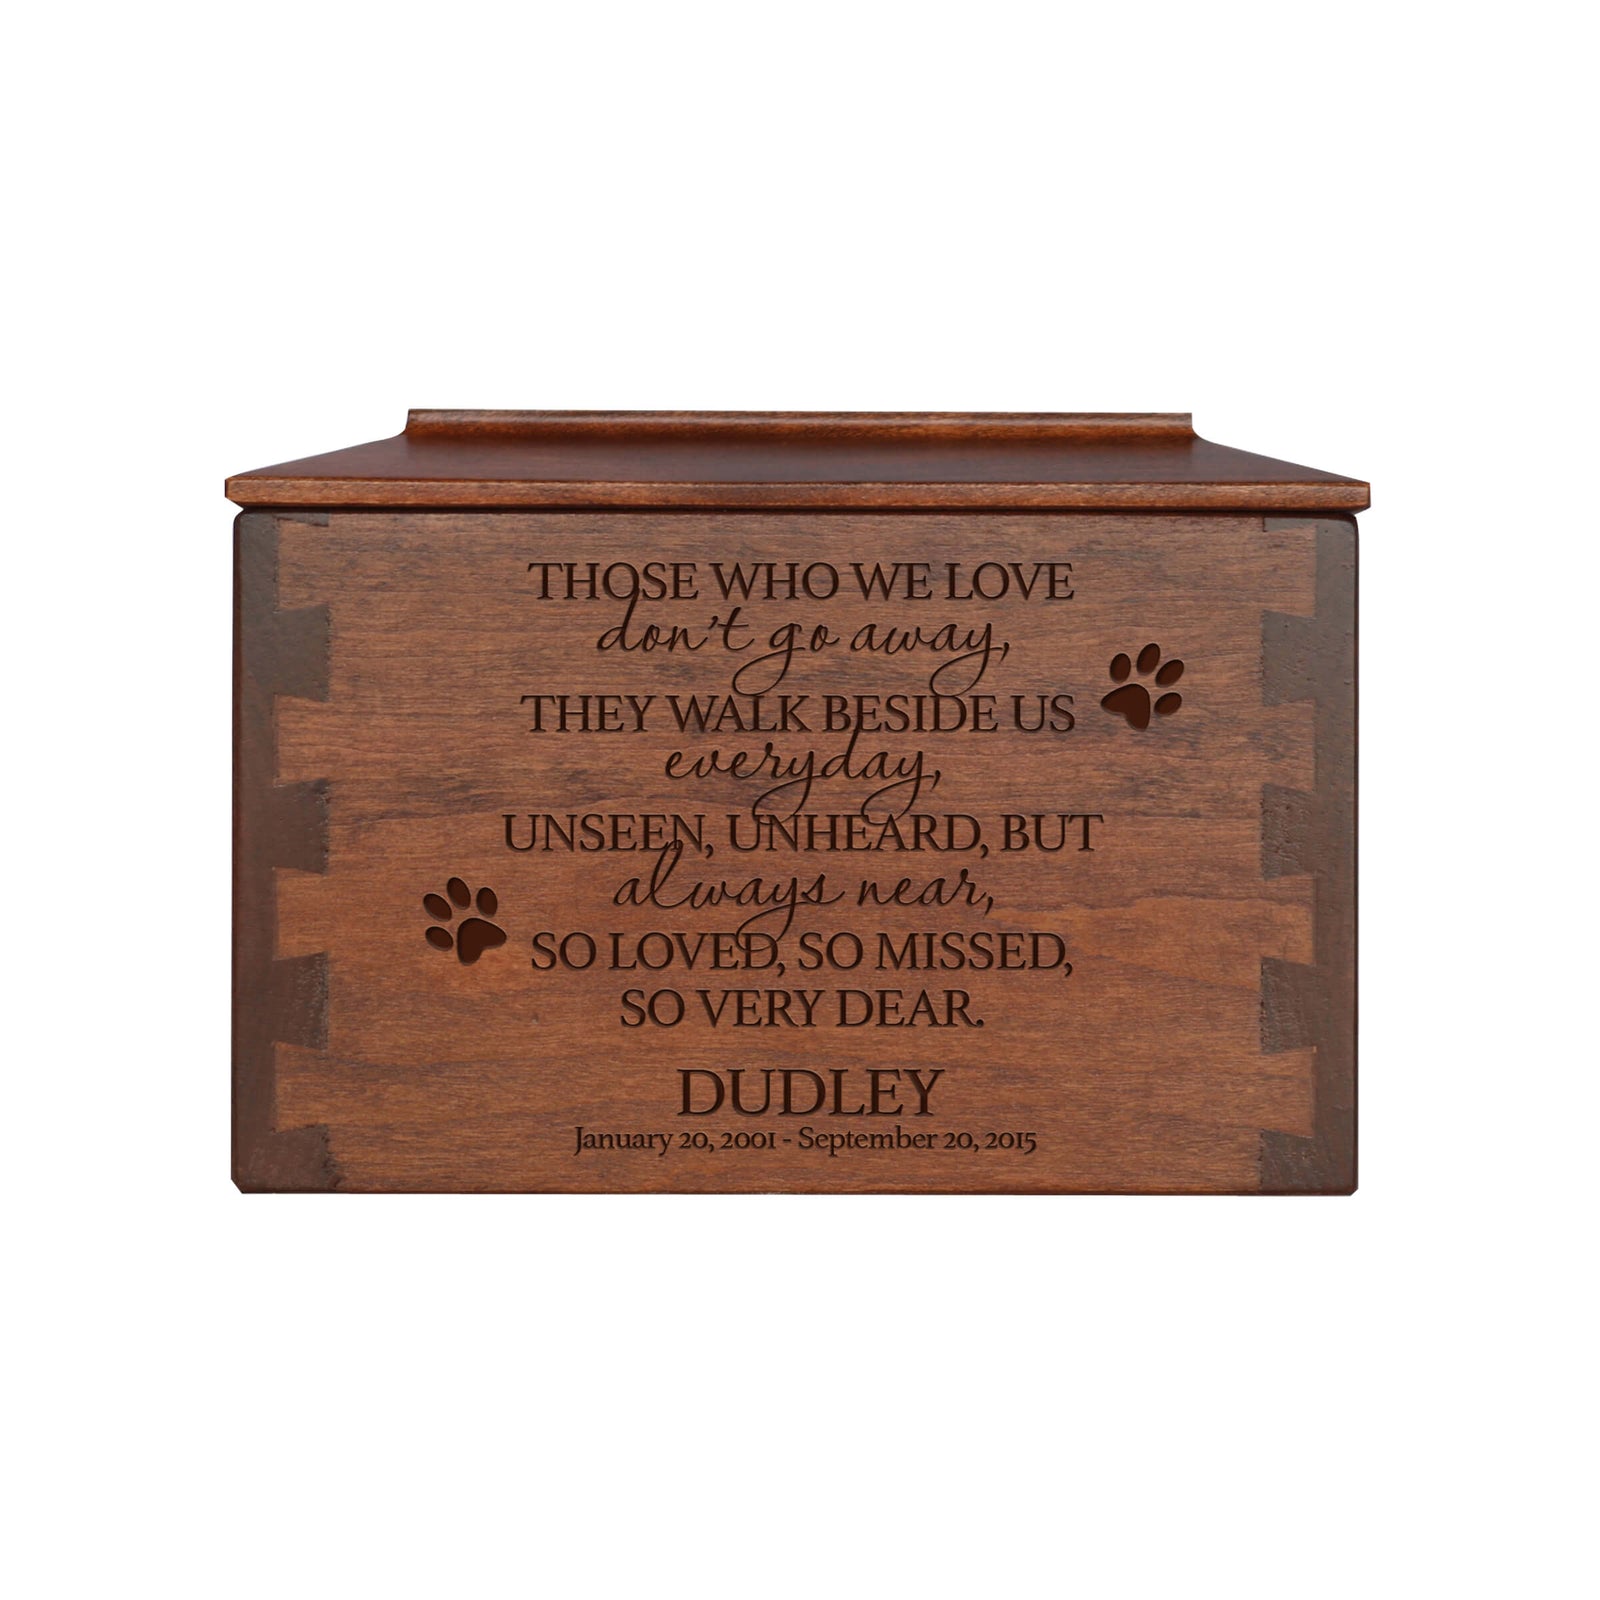 Pet Memorial Dovetail Cremation Urn Box for Dog or Cat - Those Who We Love Don't Go Away